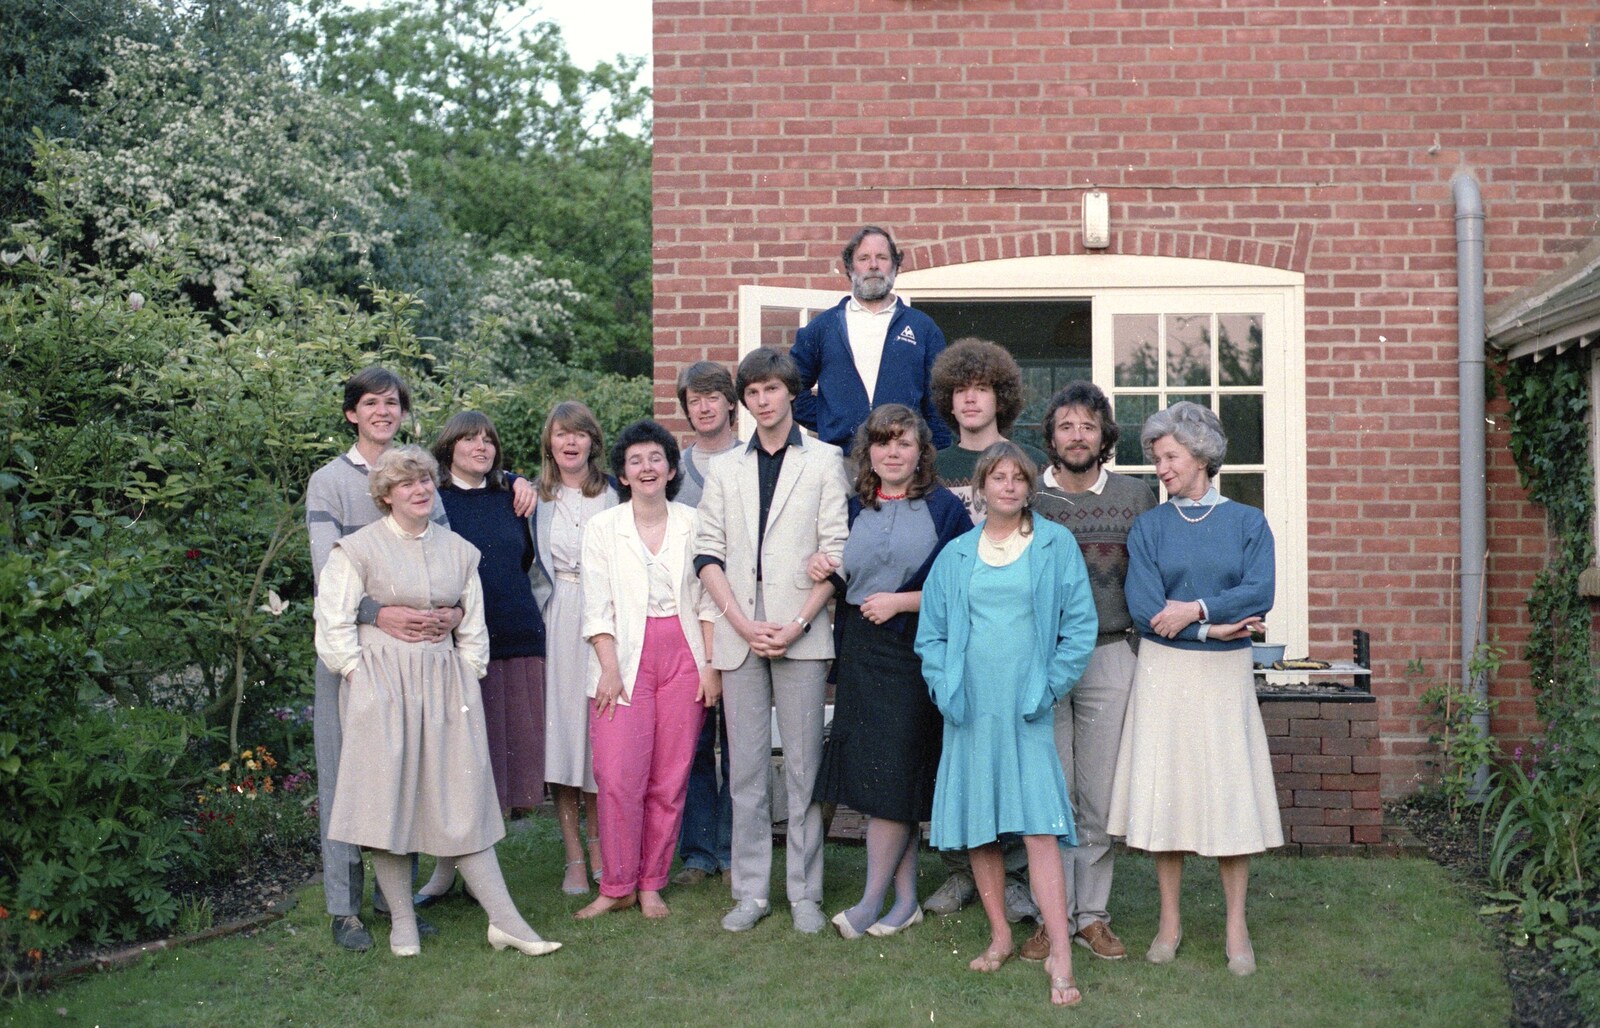 Nosher's 18th Birthday, Barton on Sea, Hampshire - 26th May 1985: Another group photo